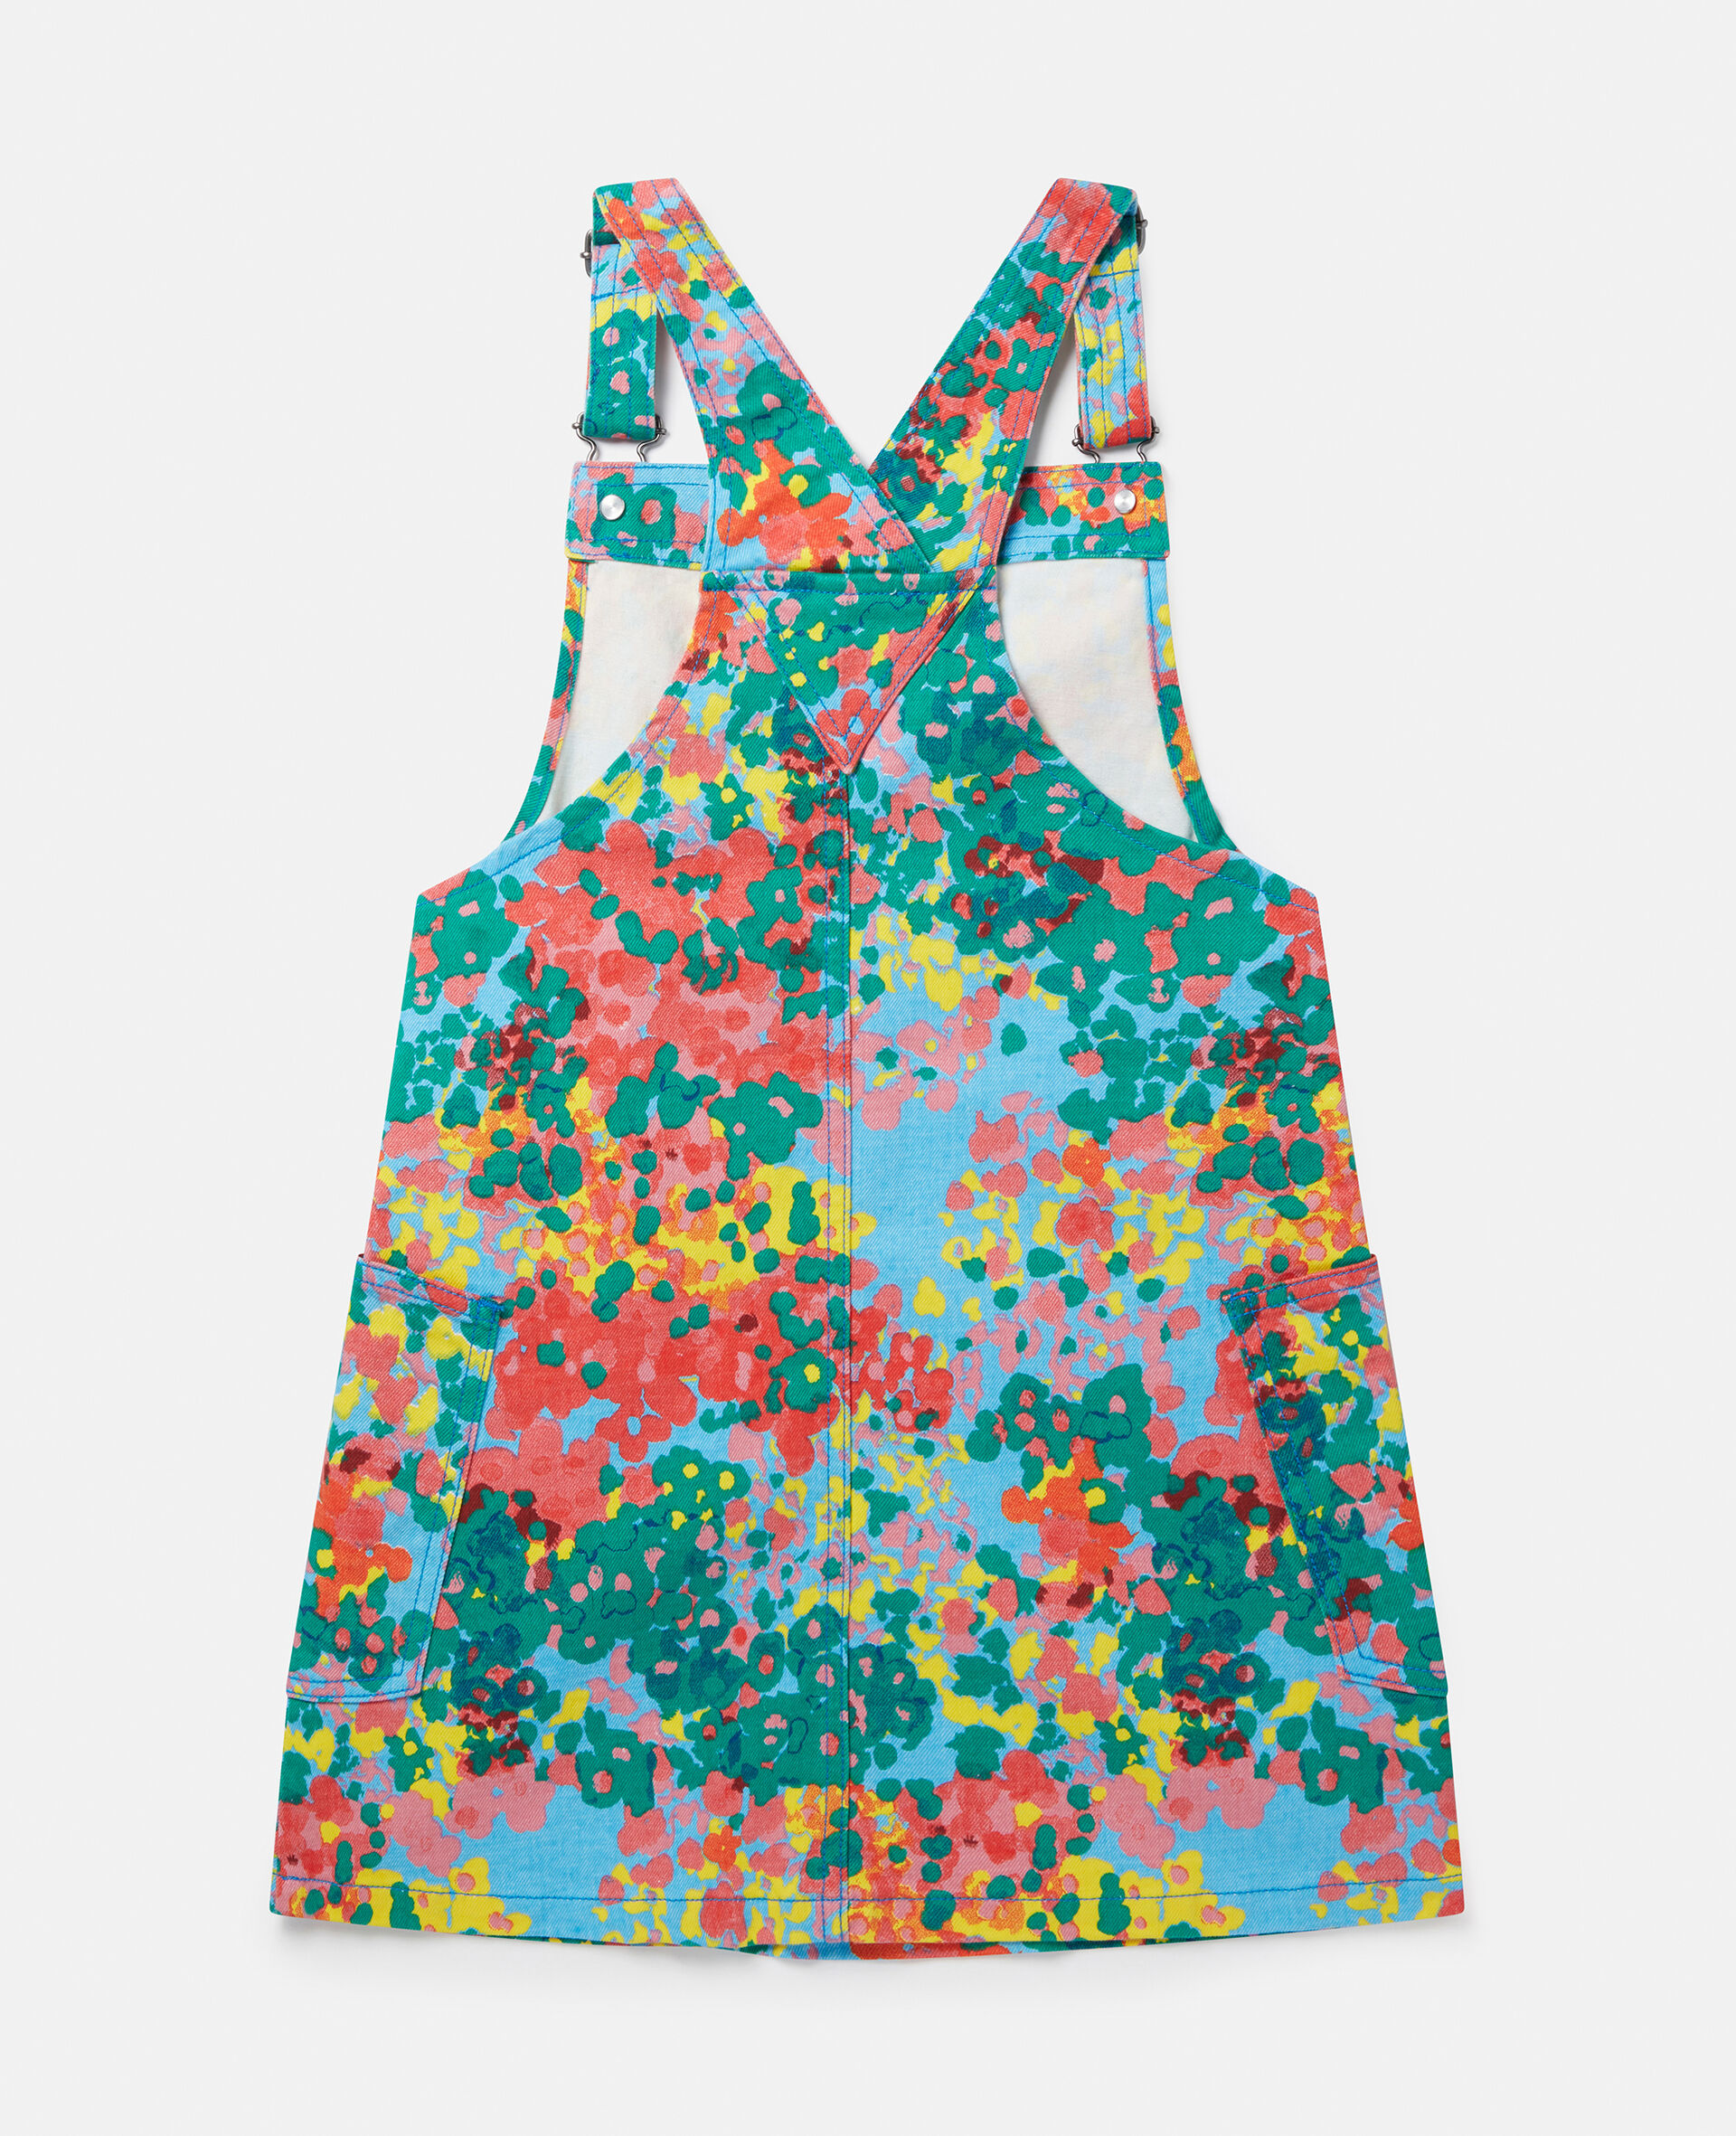 Painted Floral Print Dungaree Dress-Multicoloured-large image number 2